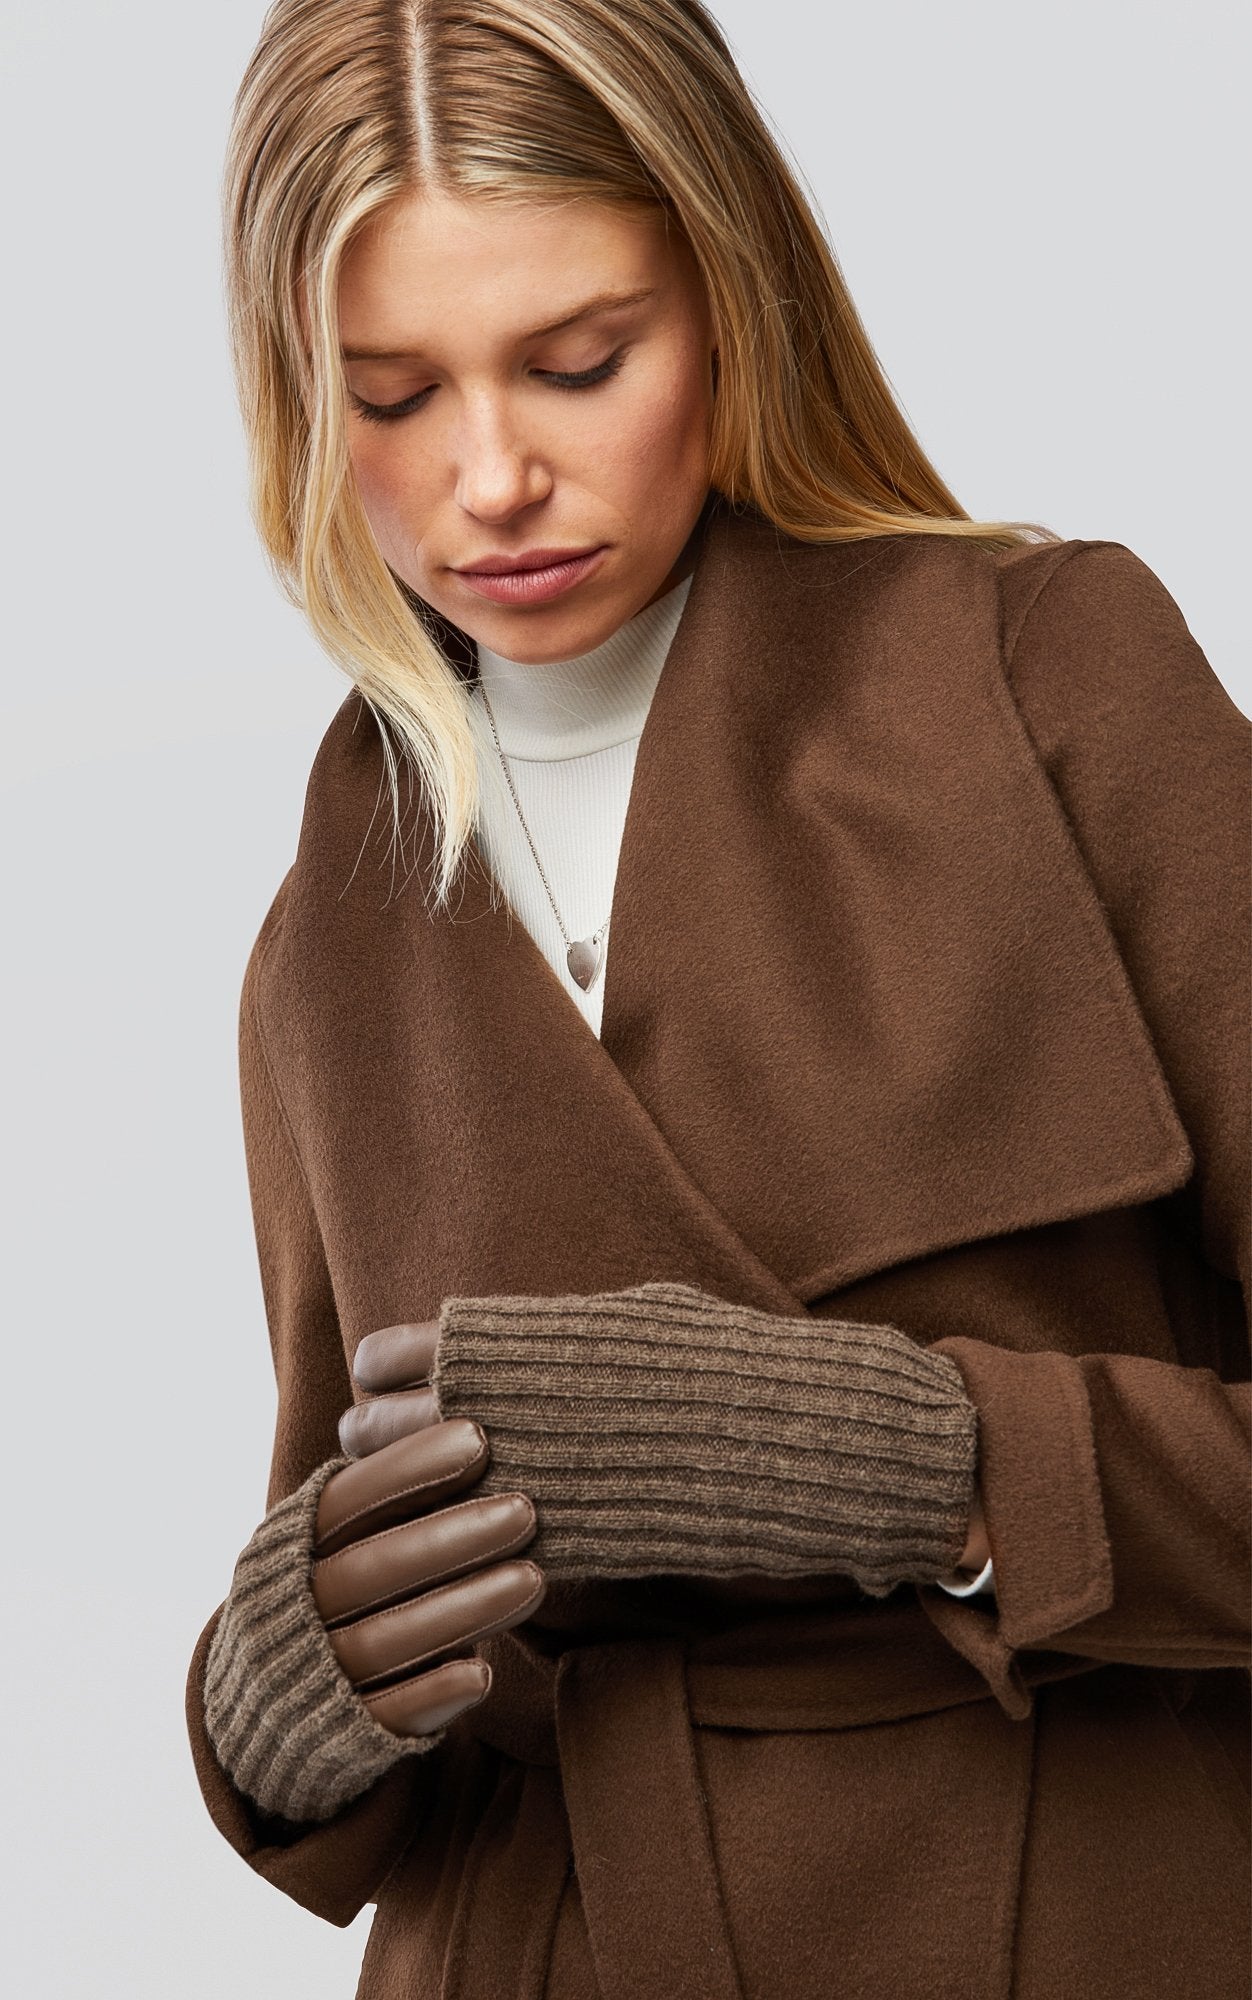 SOIA&KYO CARMEL-N - leather gloves with knit lining